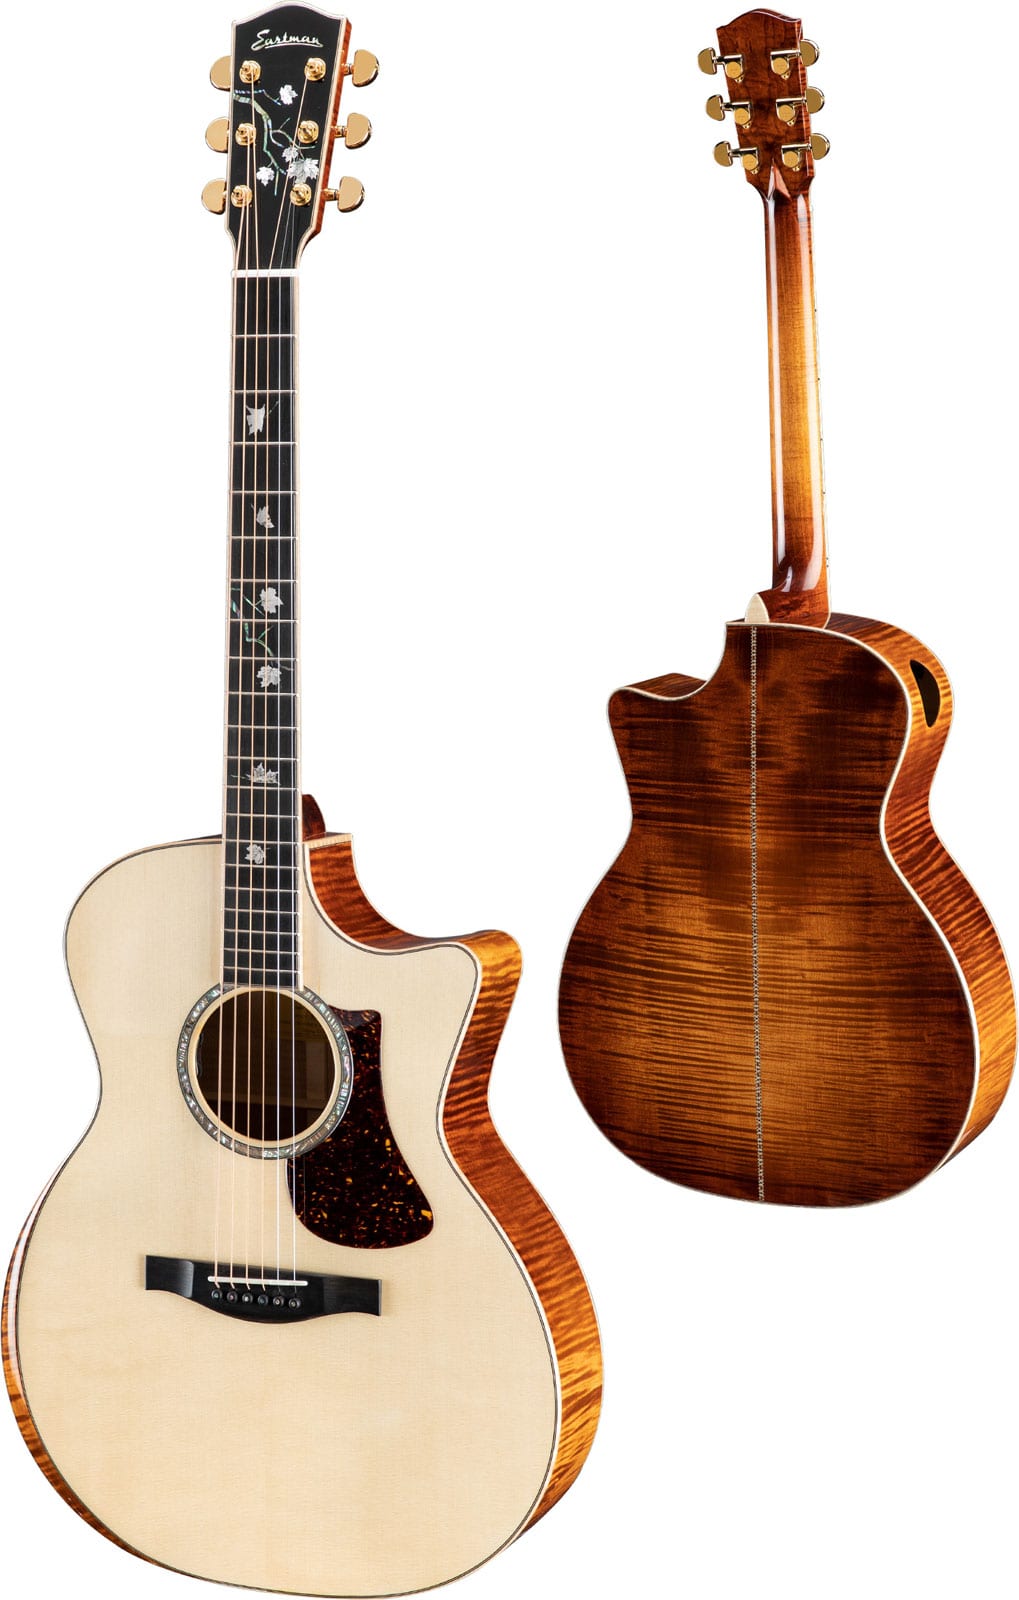 EASTMAN AC622CE NATURAL